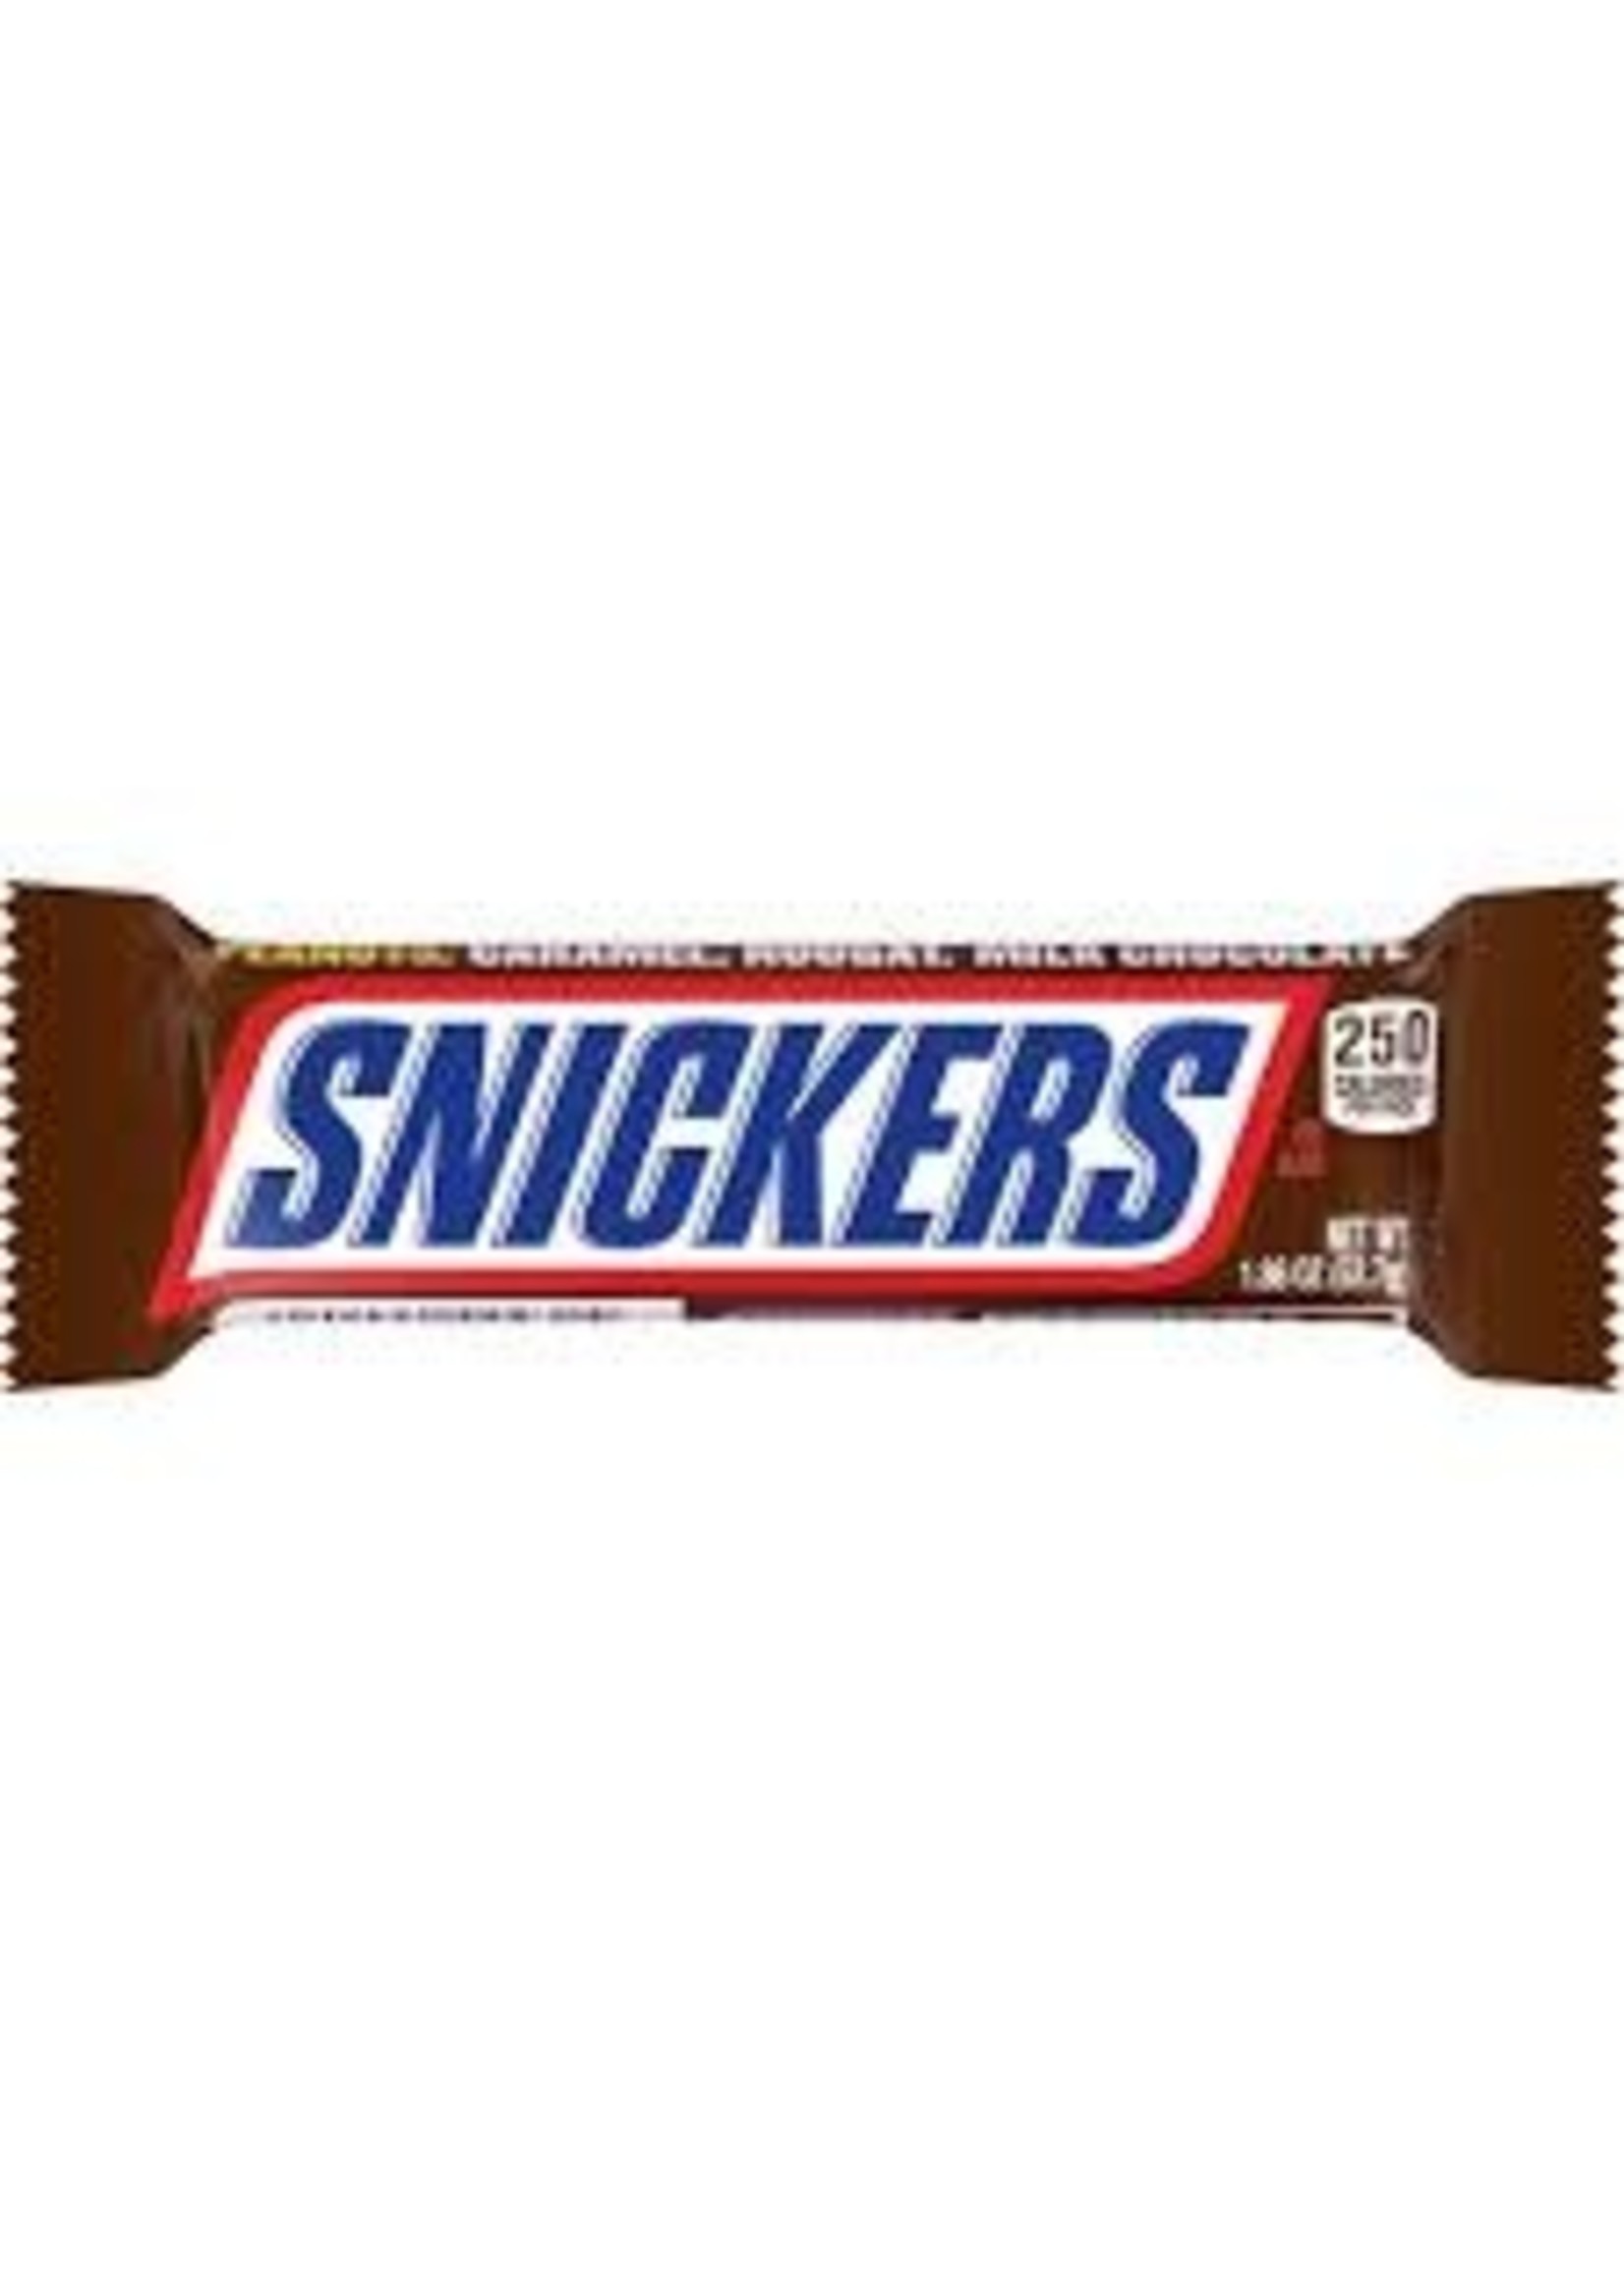 SNICKERS SNICKERS	CHOCOLATE	EACH